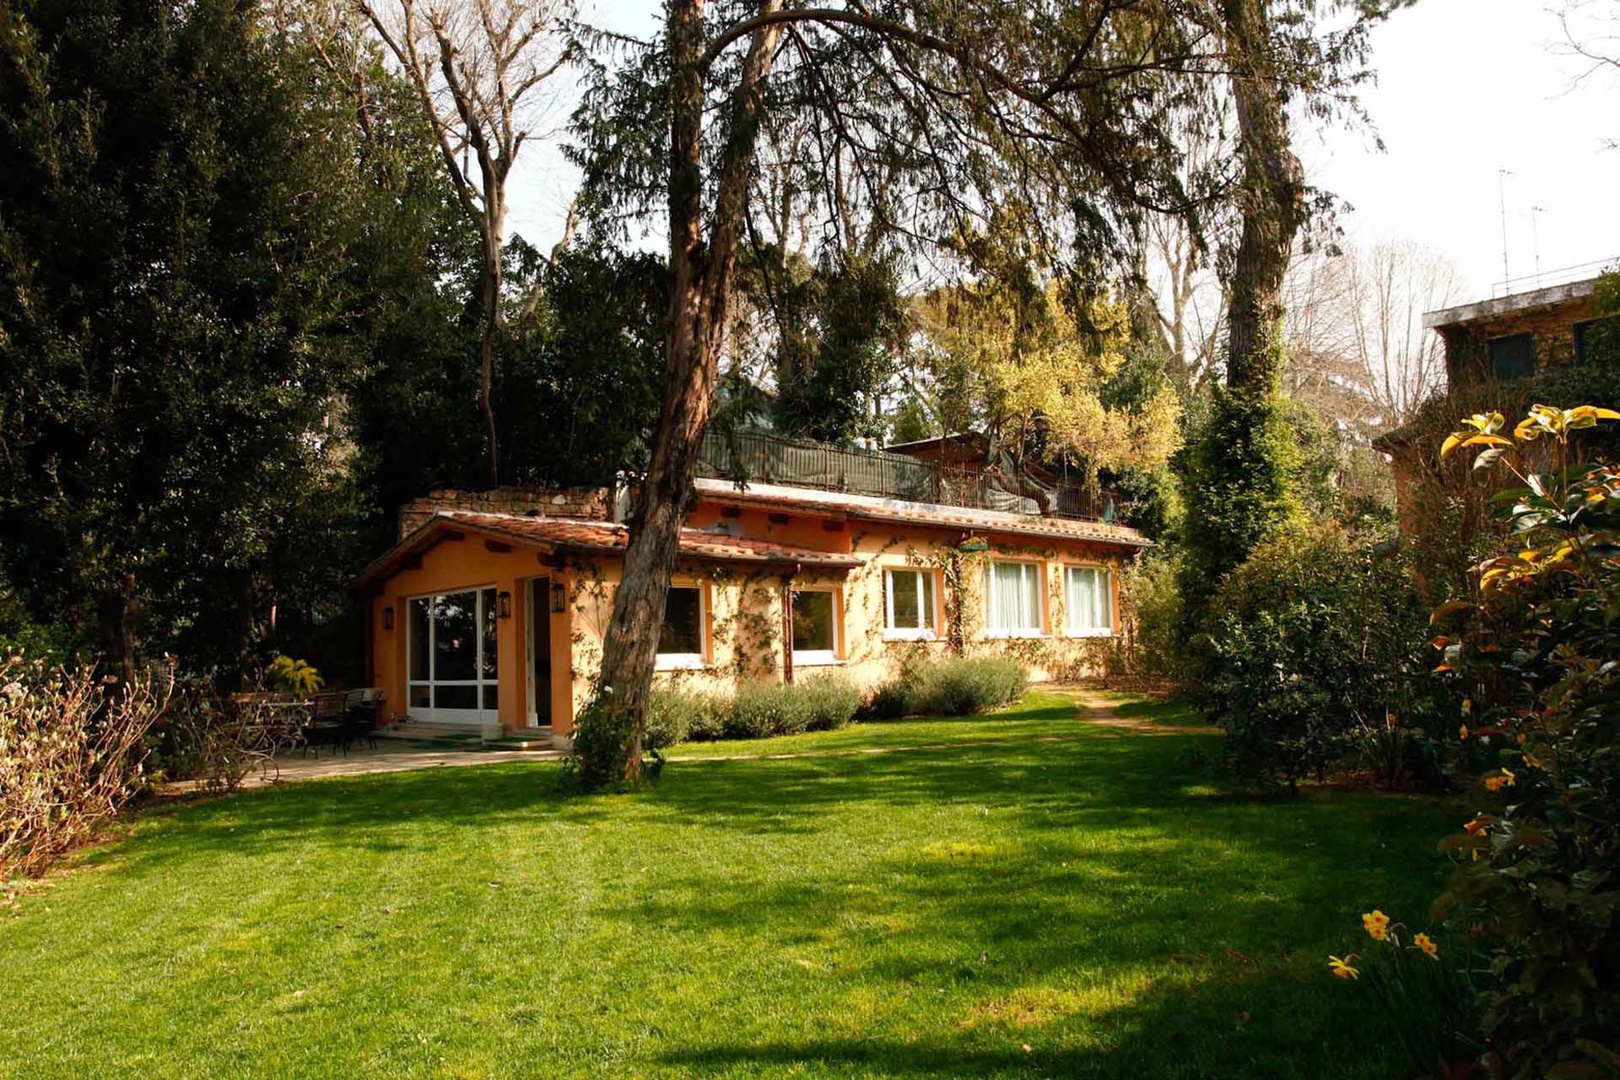 Casa Ruffo is a charming home with a large garden and spectacular views in the heart of Rome.